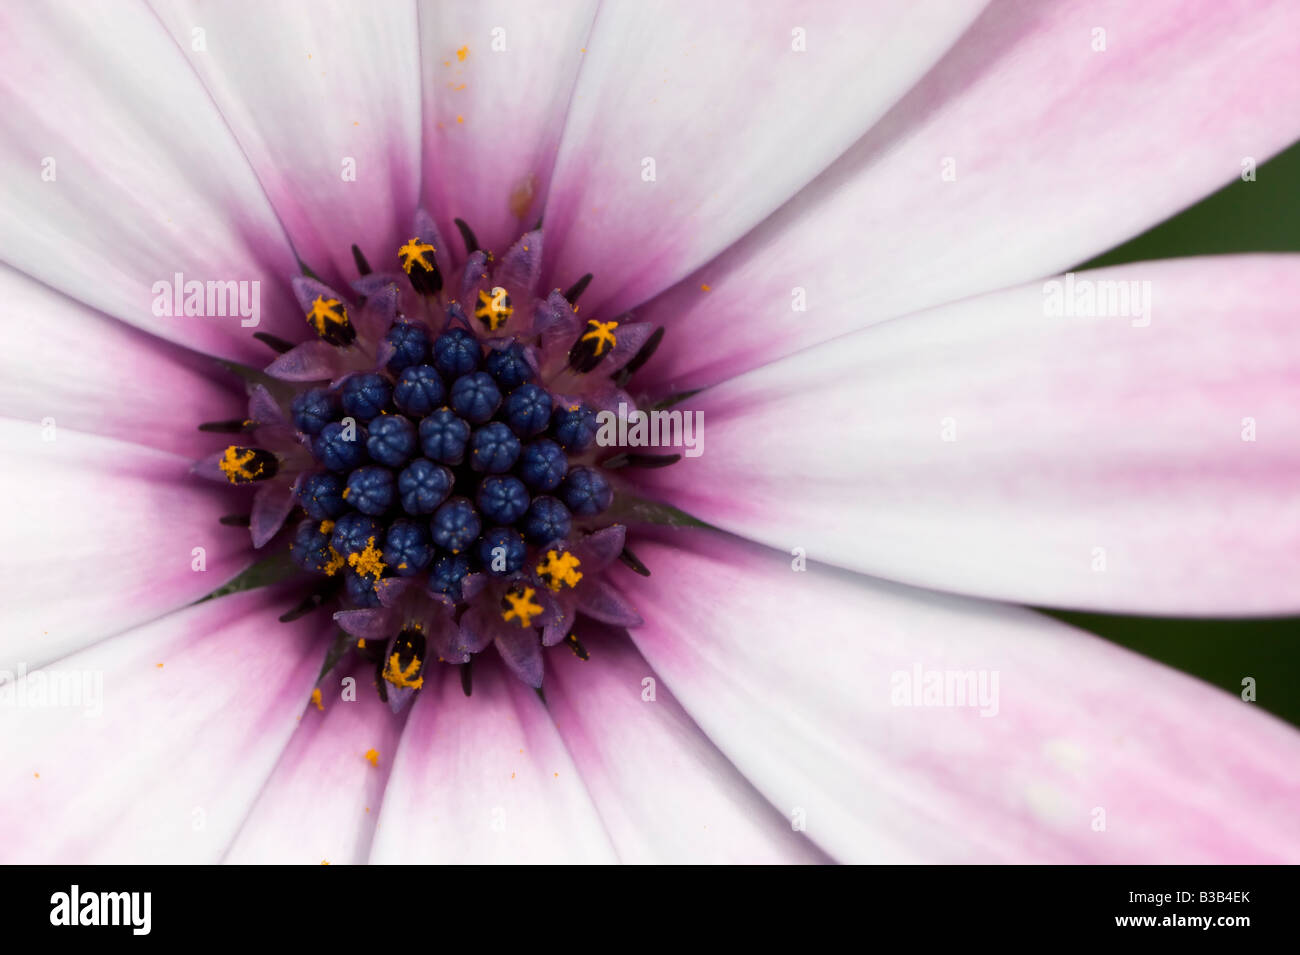 A beautiful pink osteospernum flower photographed at life size. Stock Photo